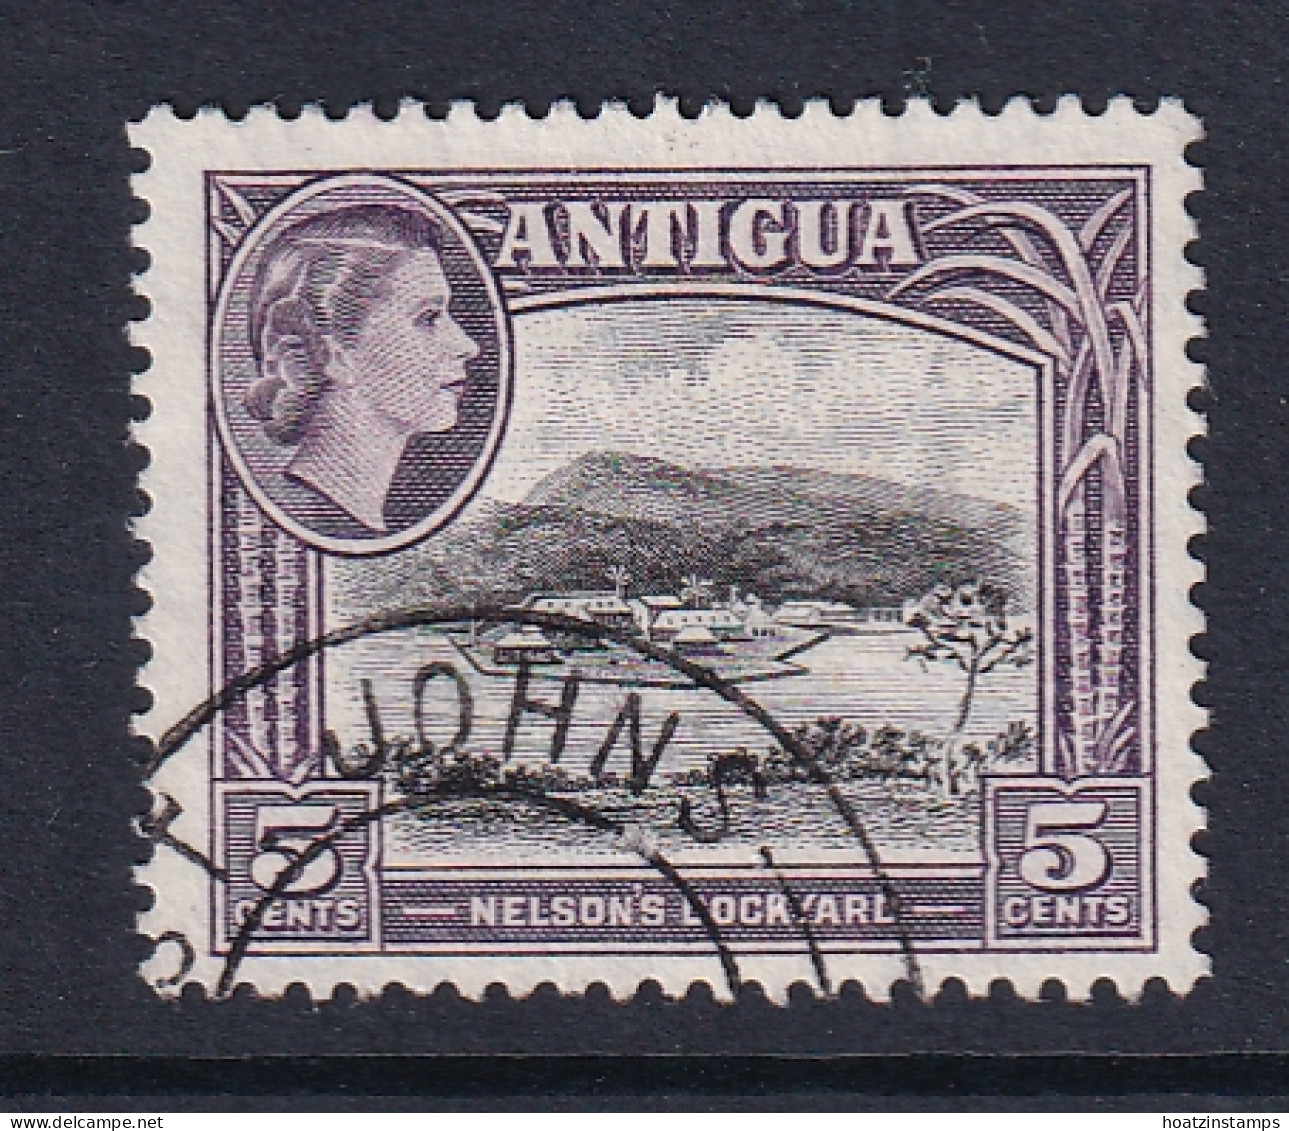 Antigua: 1953/62   QE II - Pictorial     SG125    5c       Used - 1858-1960 Crown Colony